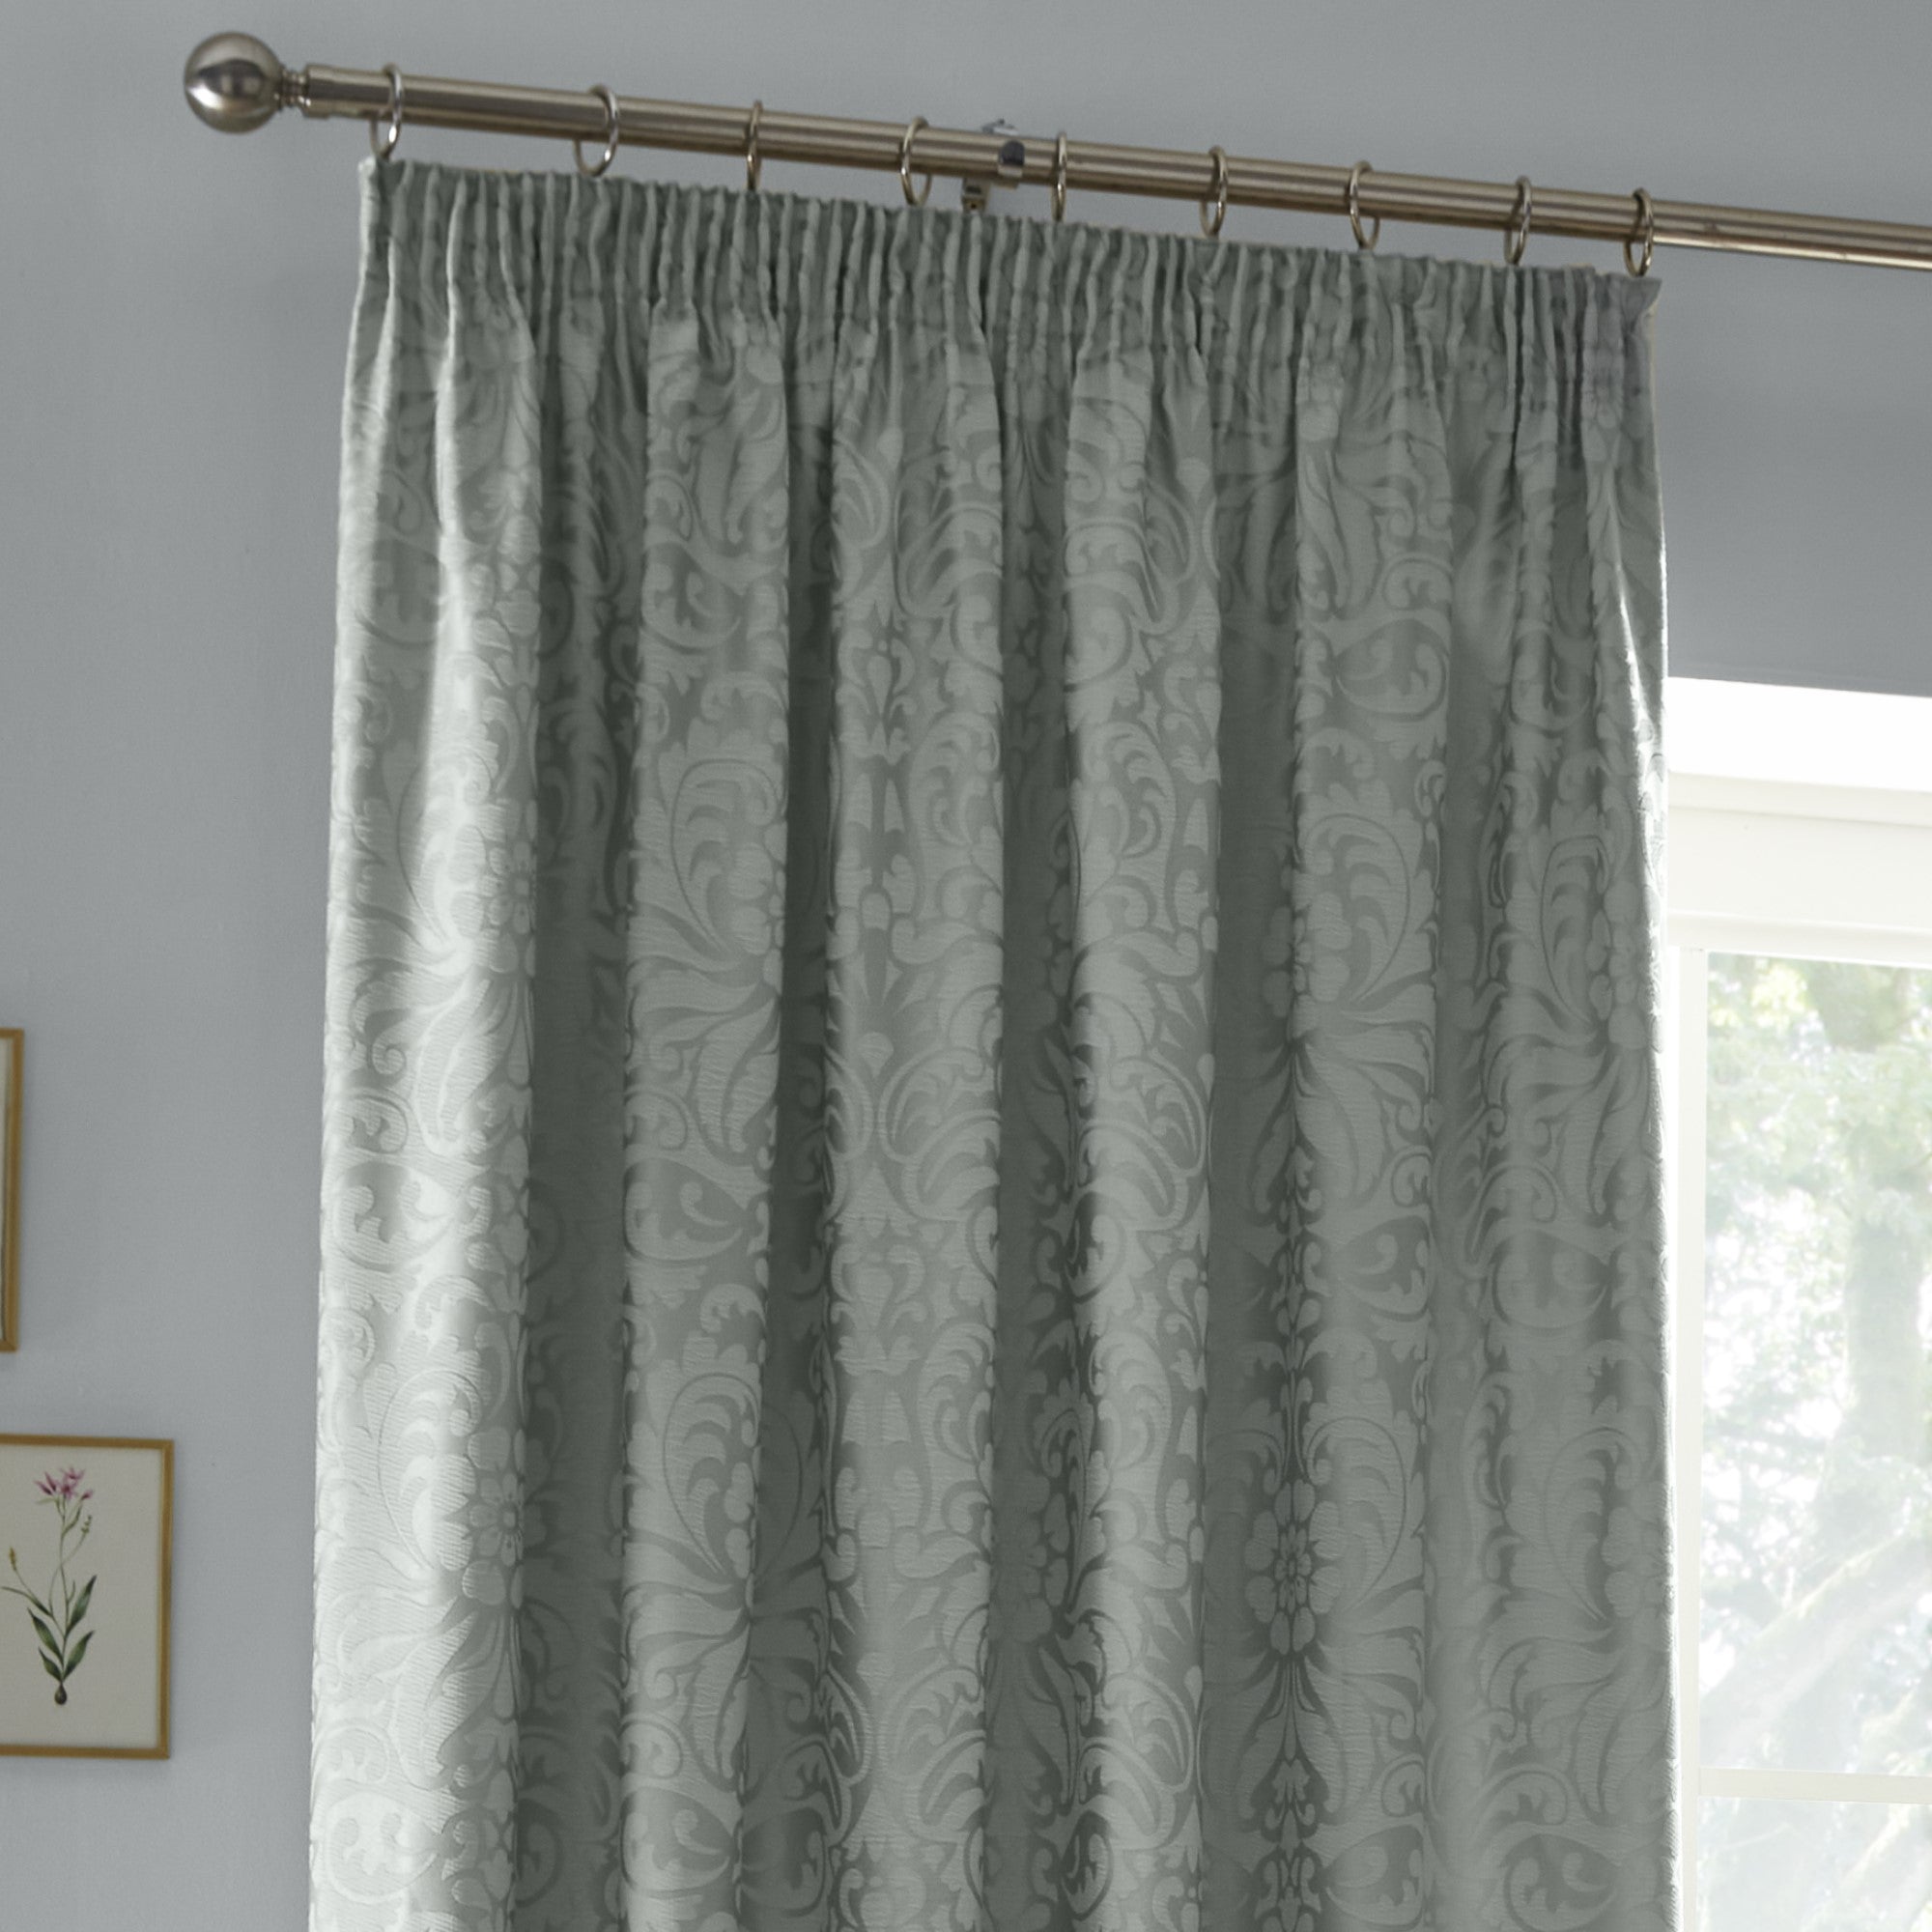 Pair of Pencil Pleat Curtains With Tie-Backs Worcester by Appletree Heritage in Green